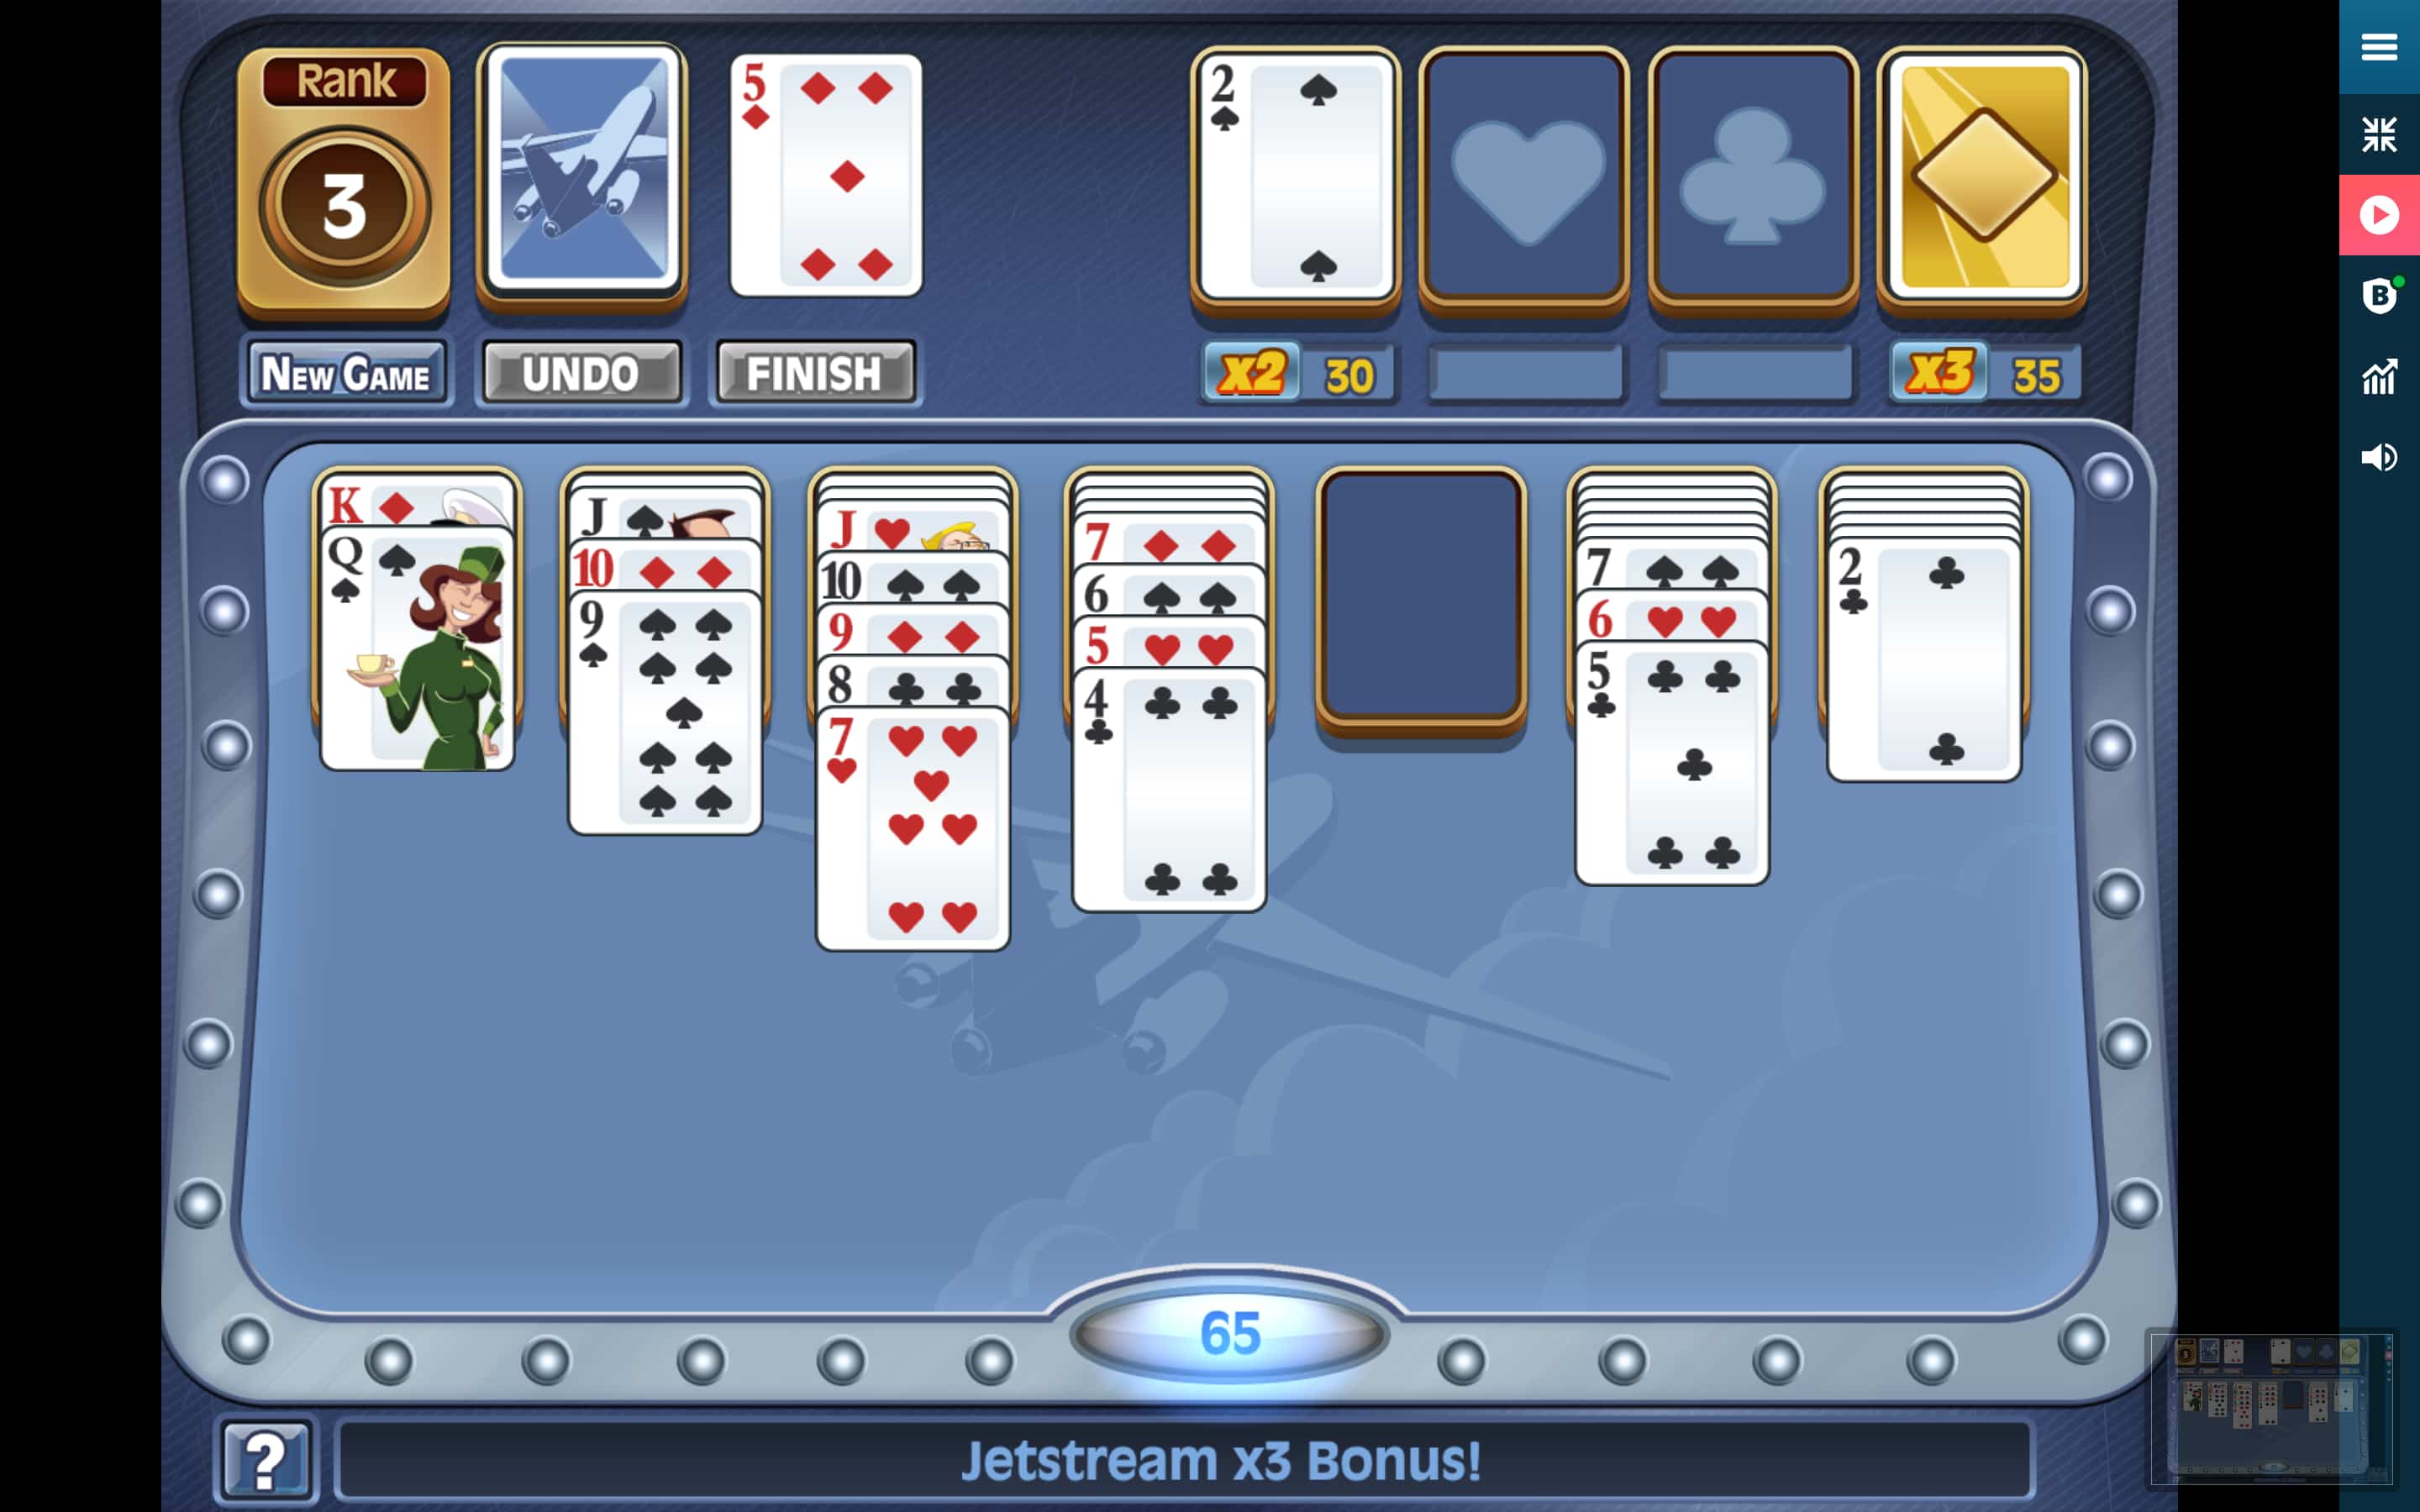 play solitaire games